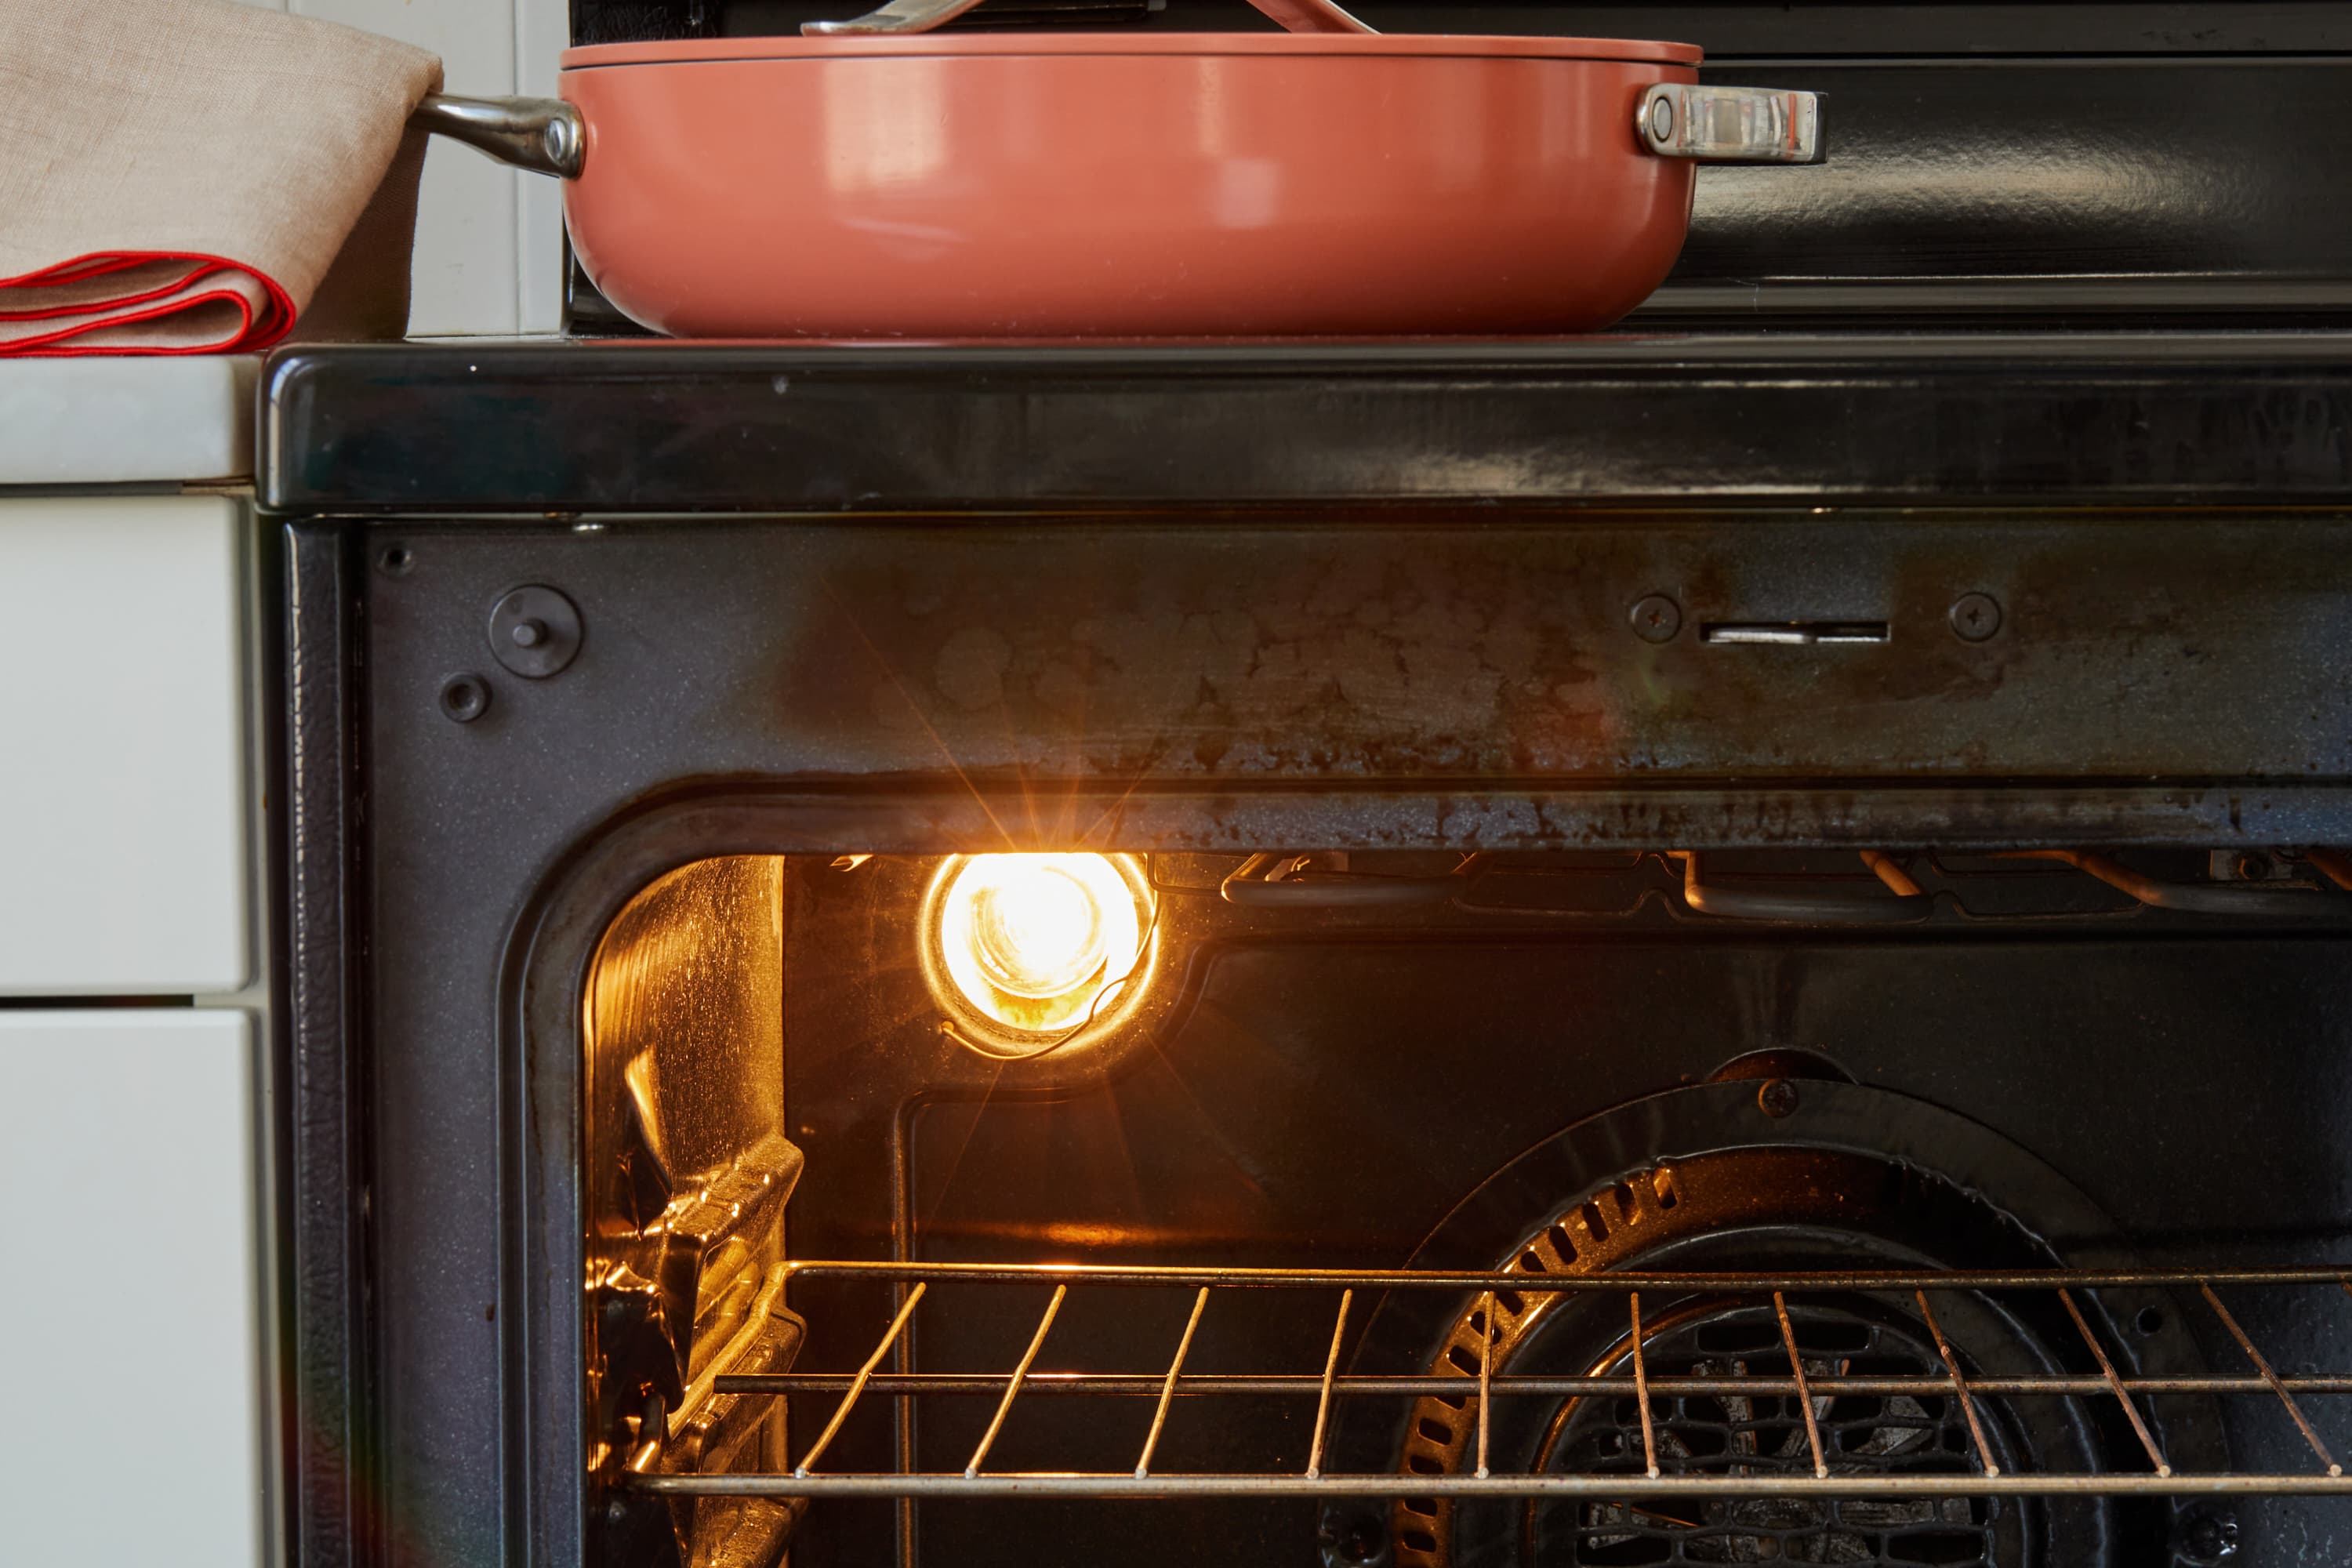 How to Change an Oven Light - Step-By-Step Guide